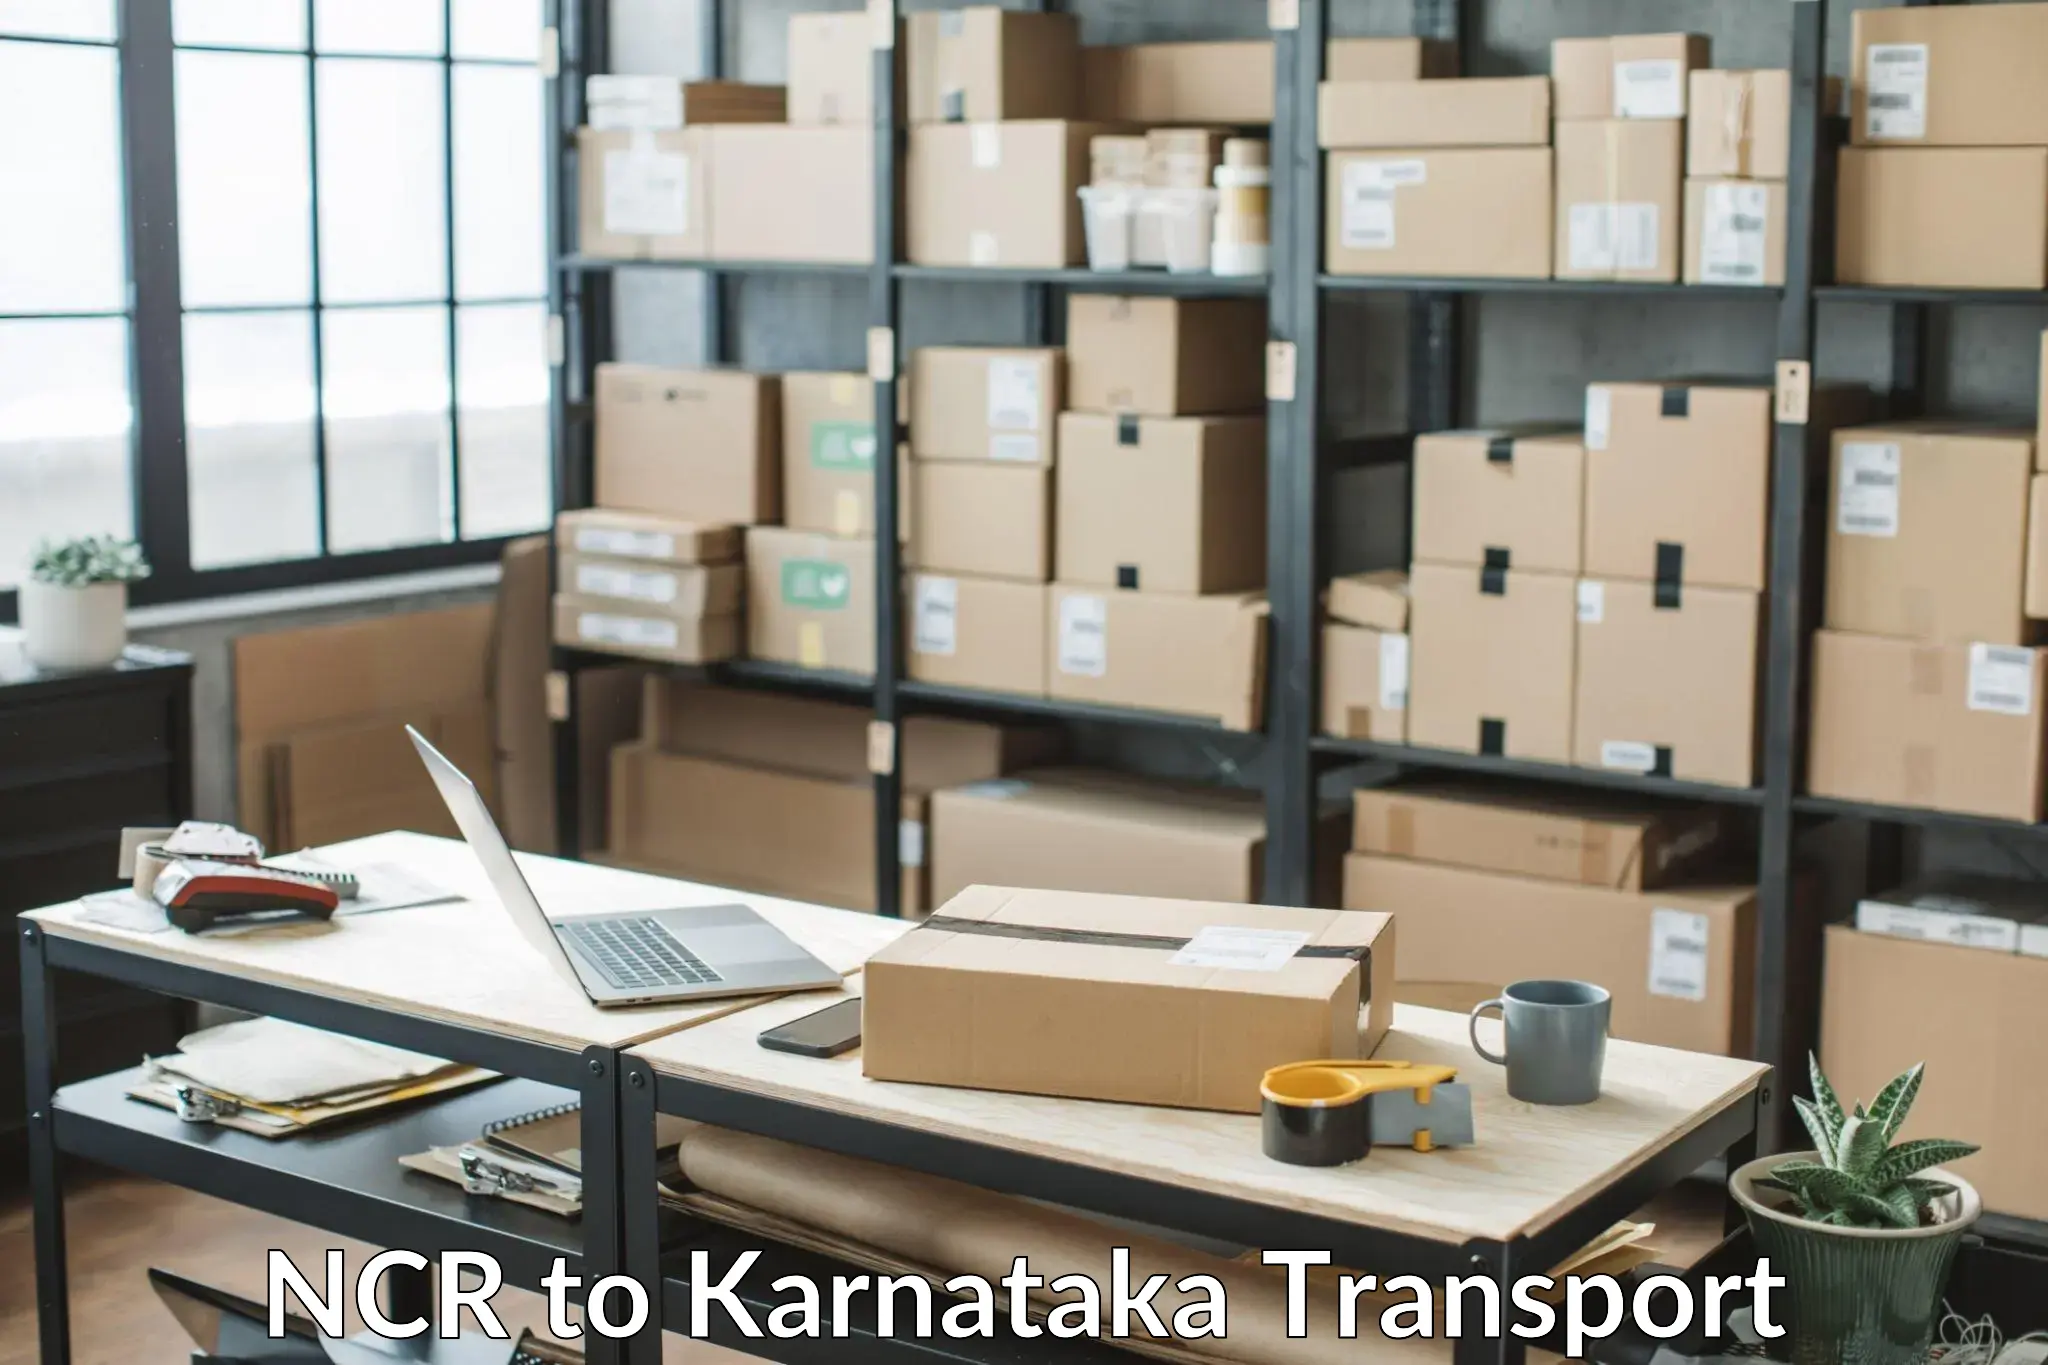 Daily parcel service transport NCR to Chikkamagaluru